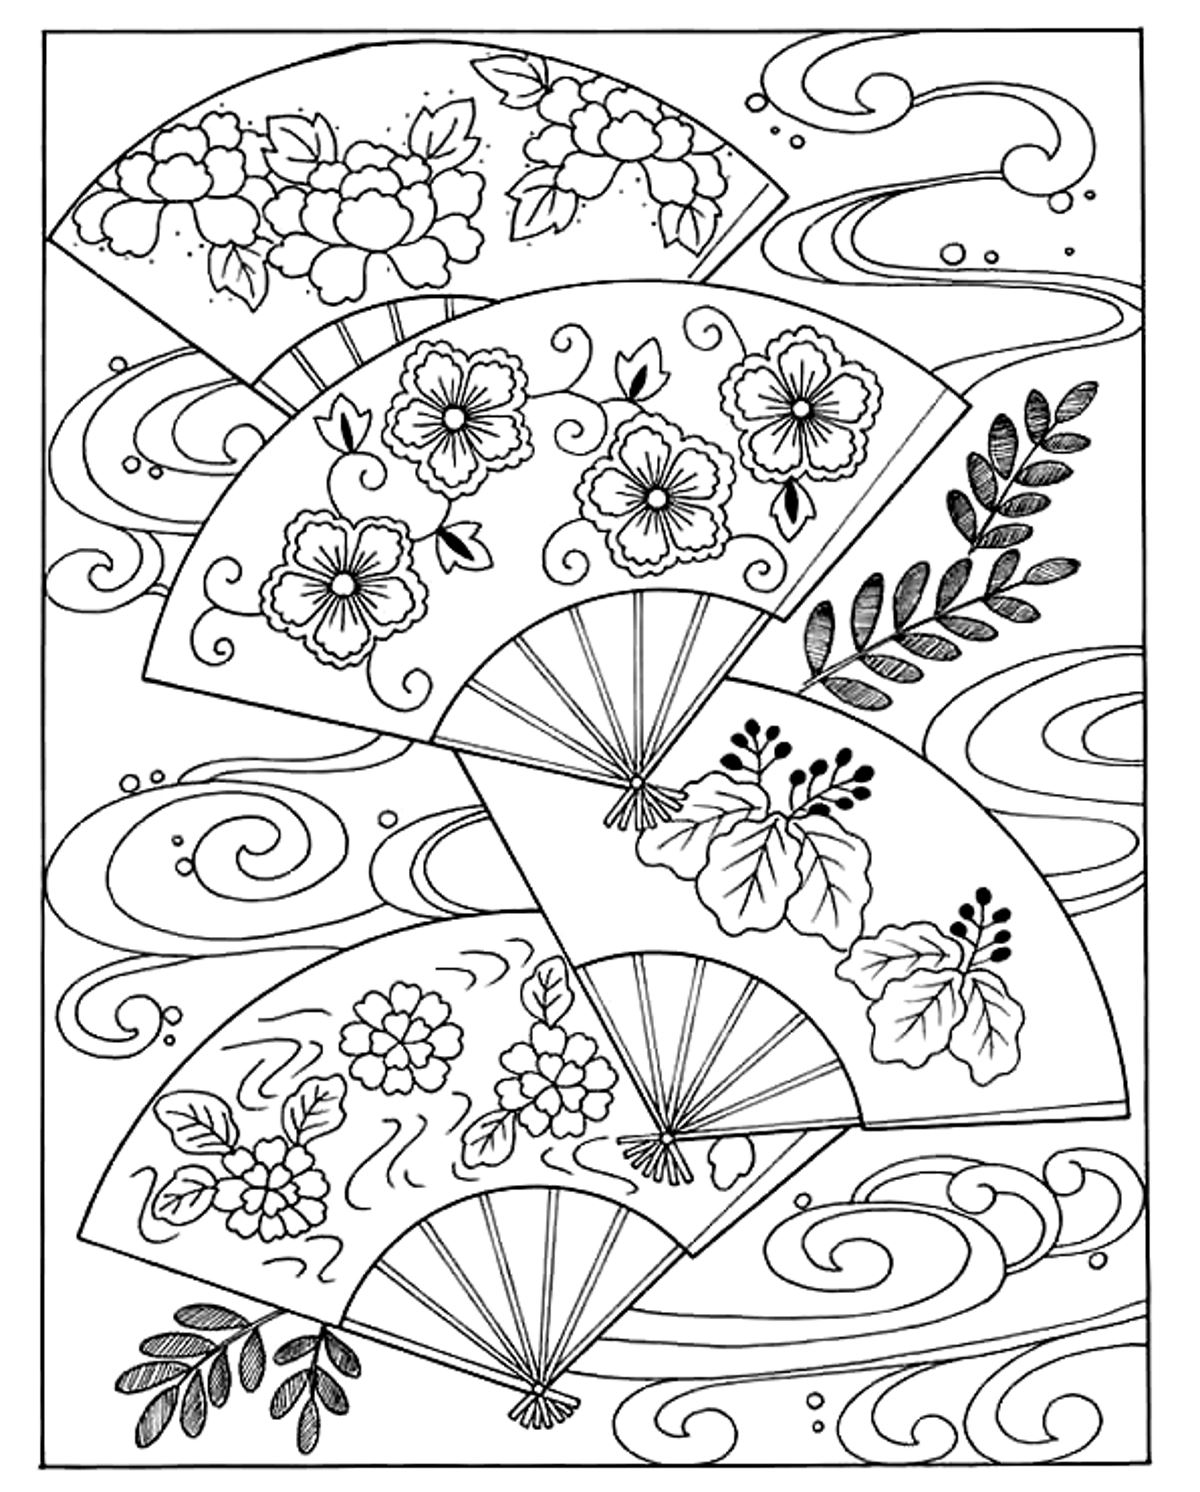 Japanese hand fan Japan Adult Coloring Pages